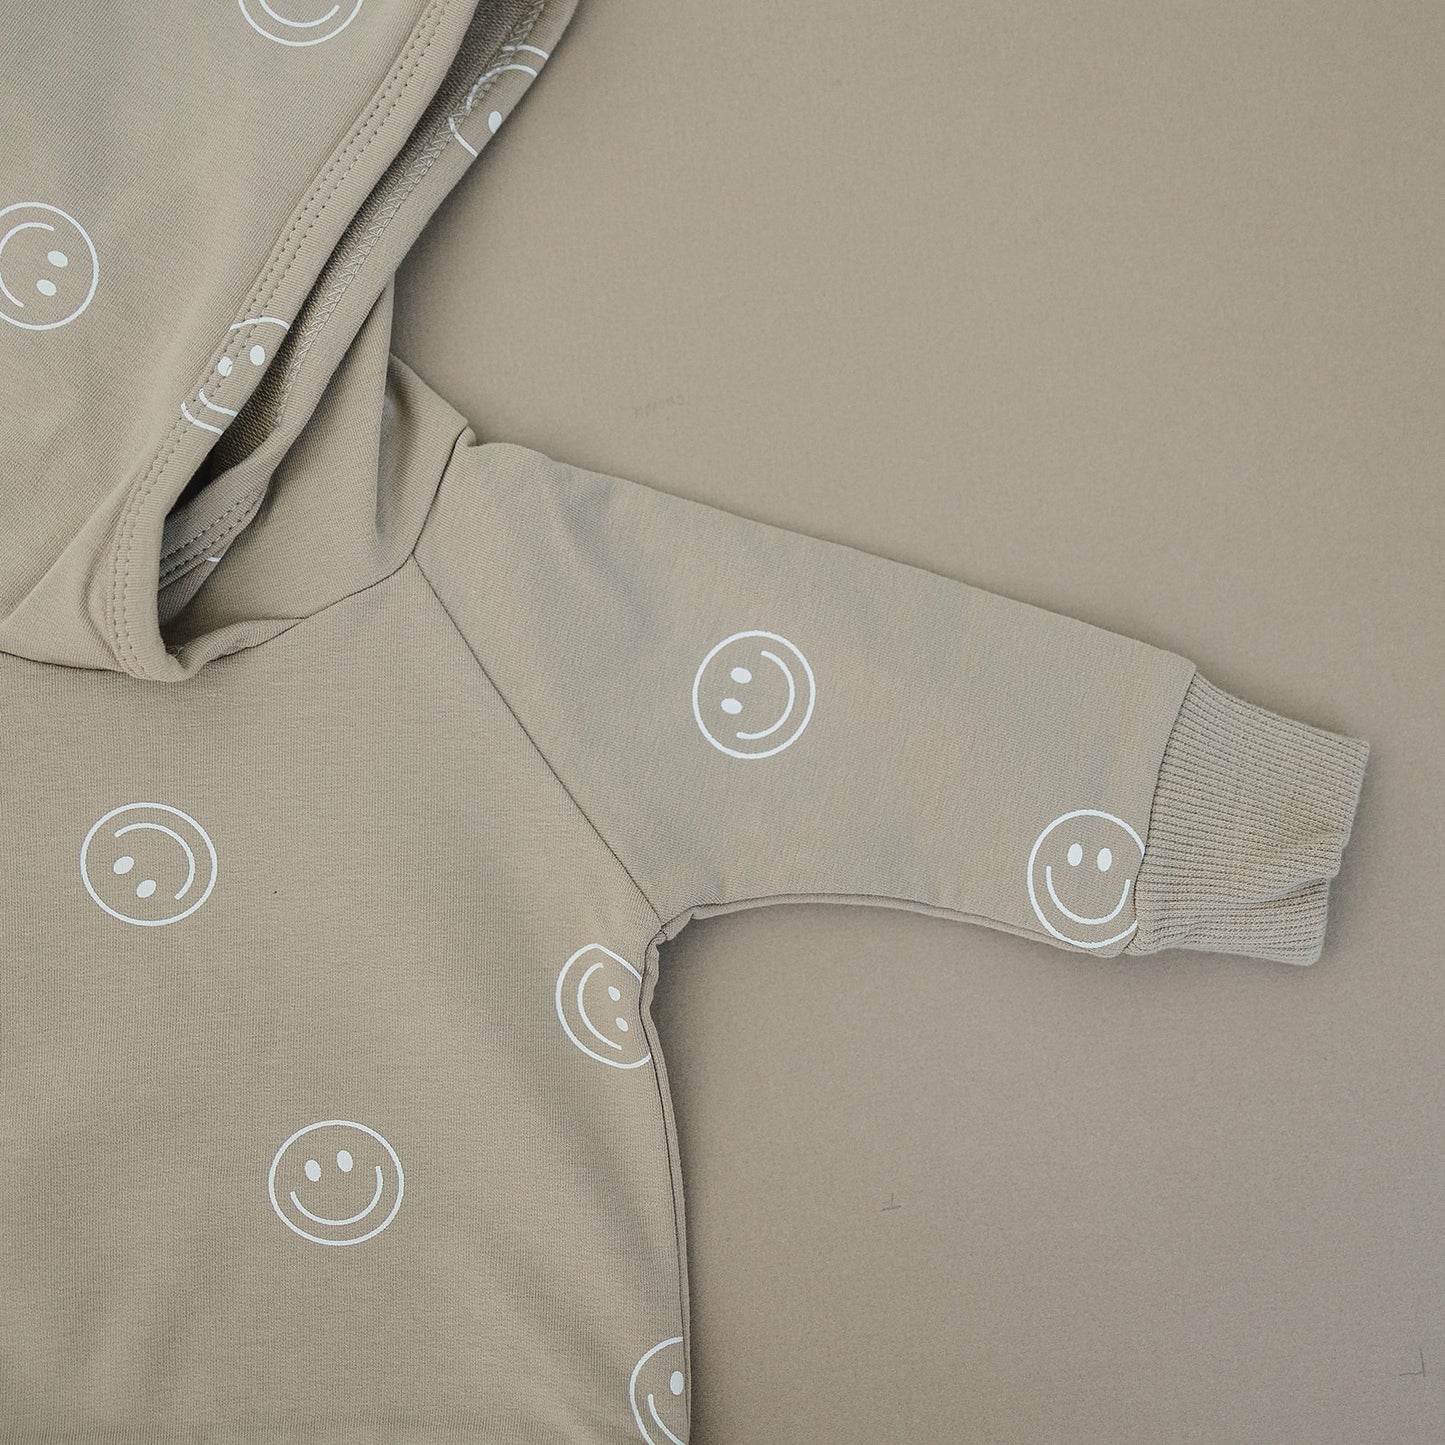 Mebie Baby- SmILeY fAcE sEt